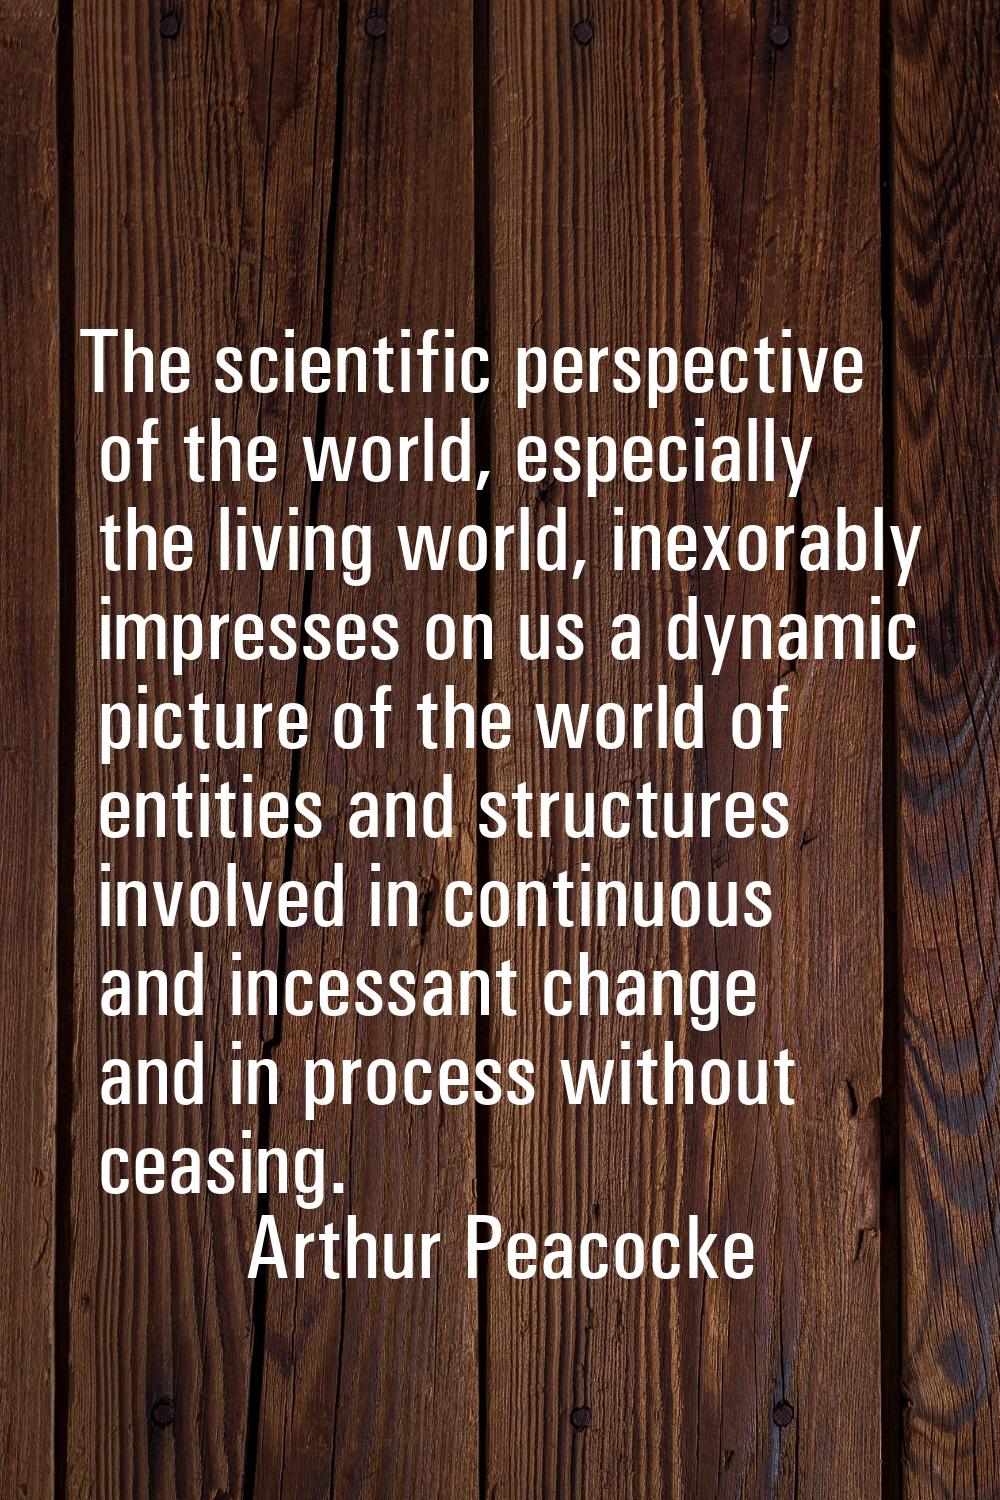 The scientific perspective of the world, especially the living world, inexorably impresses on us a 